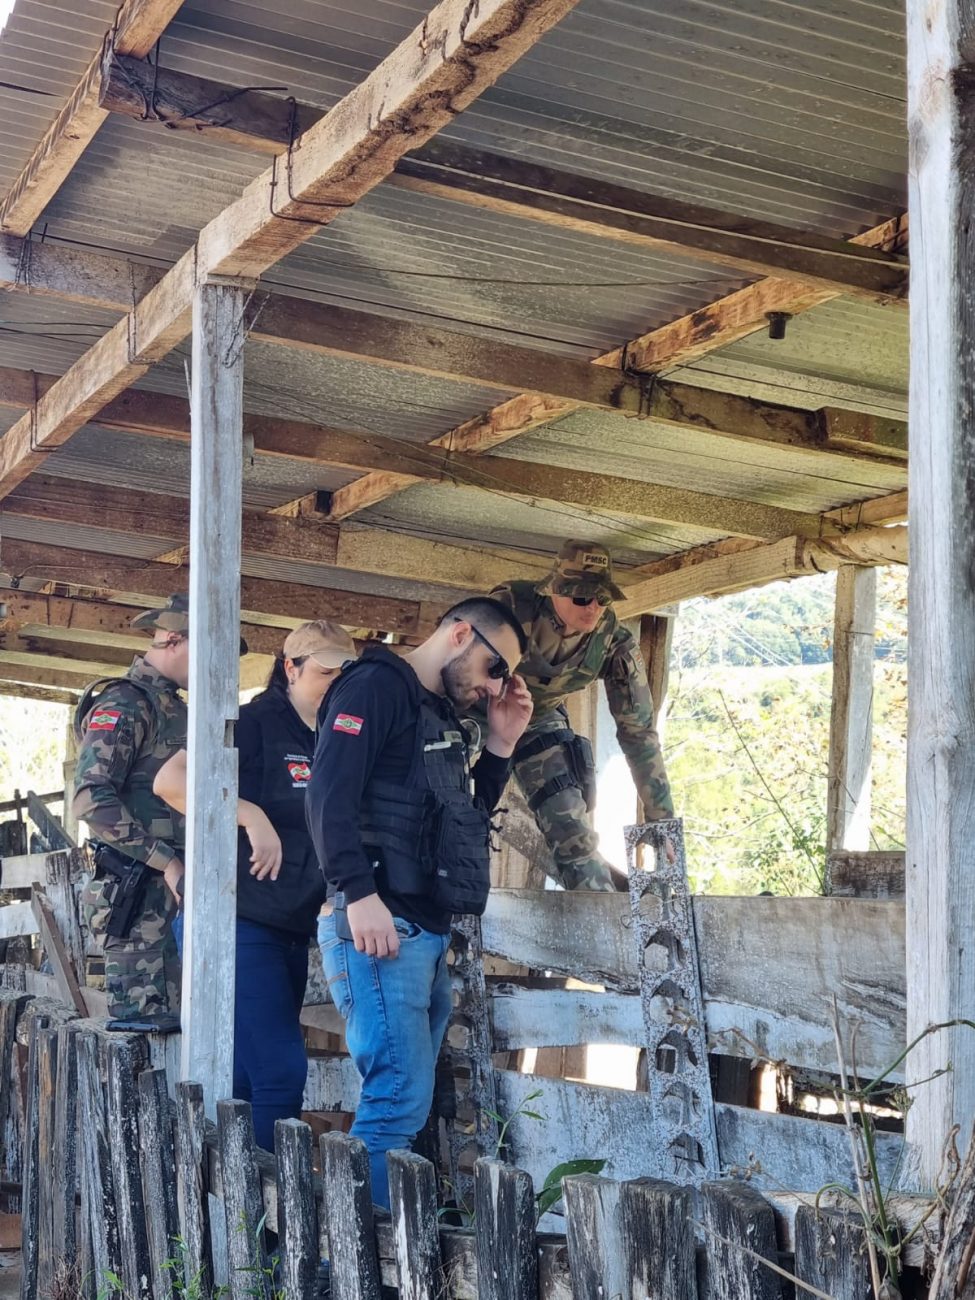 Cidasc police and veterinarians examined about 200 cattle and found no conclusive evidence of animal cruelty.  - Civil Police / Kaoagro / Reproduction